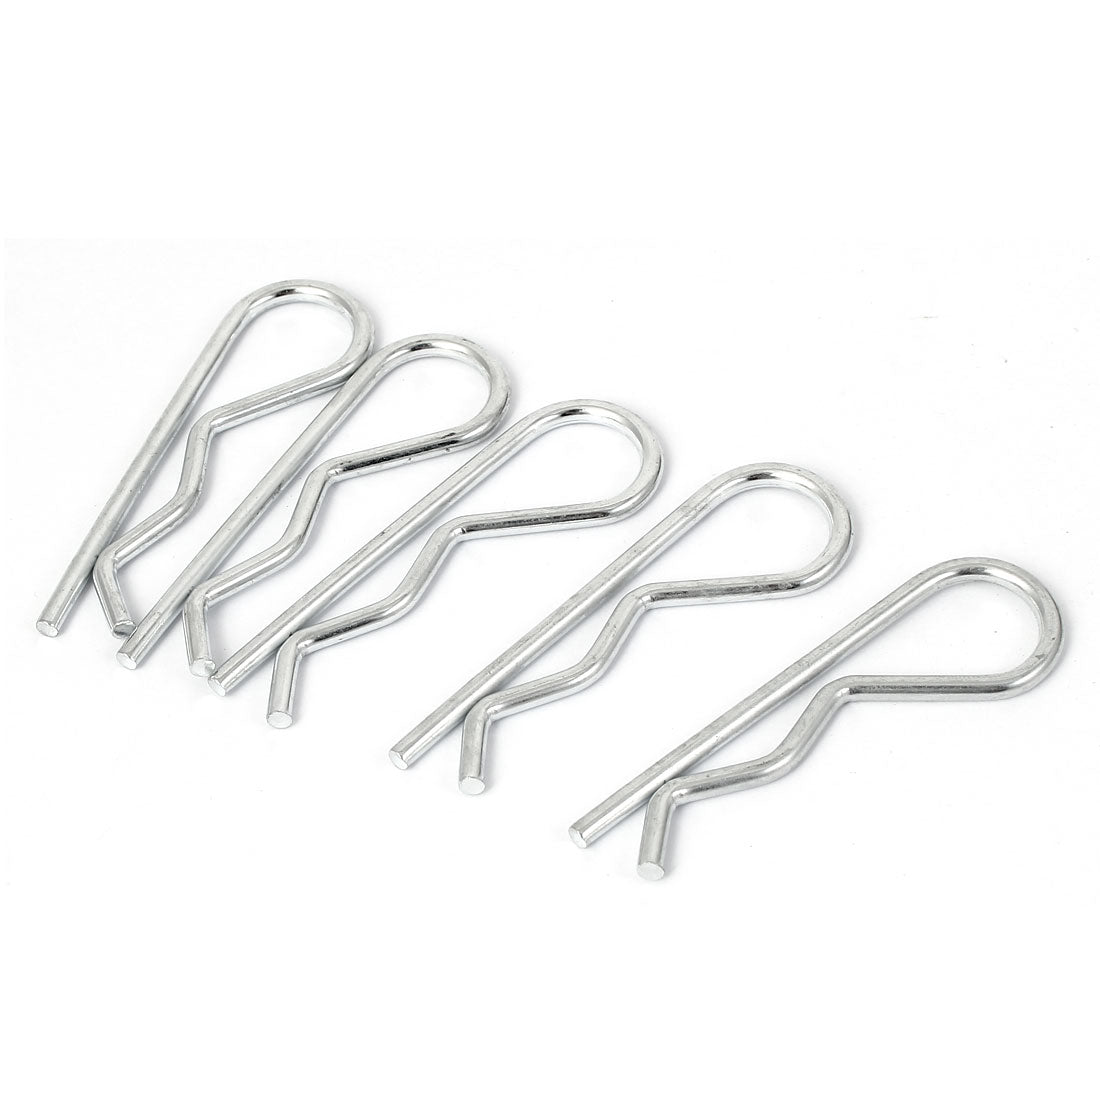 uxcell Uxcell 3mm x 66mm R-Clip Spring Locking Cotter Clip Pins Fastener Silver Tone 5 Pcs